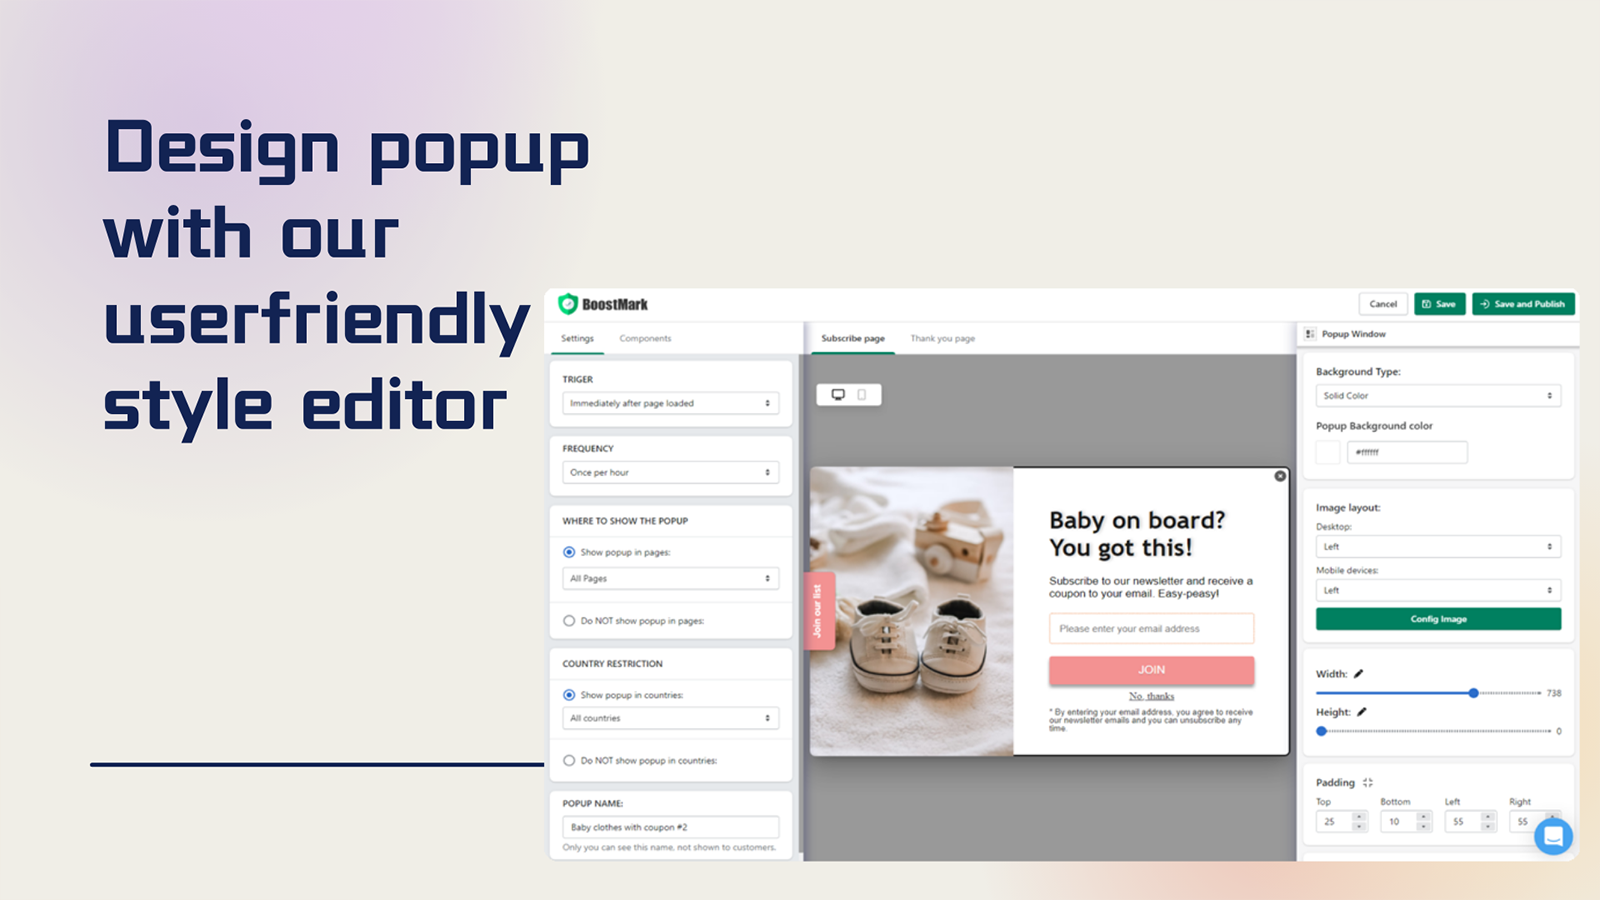 Design popup with our userfriendly style editor